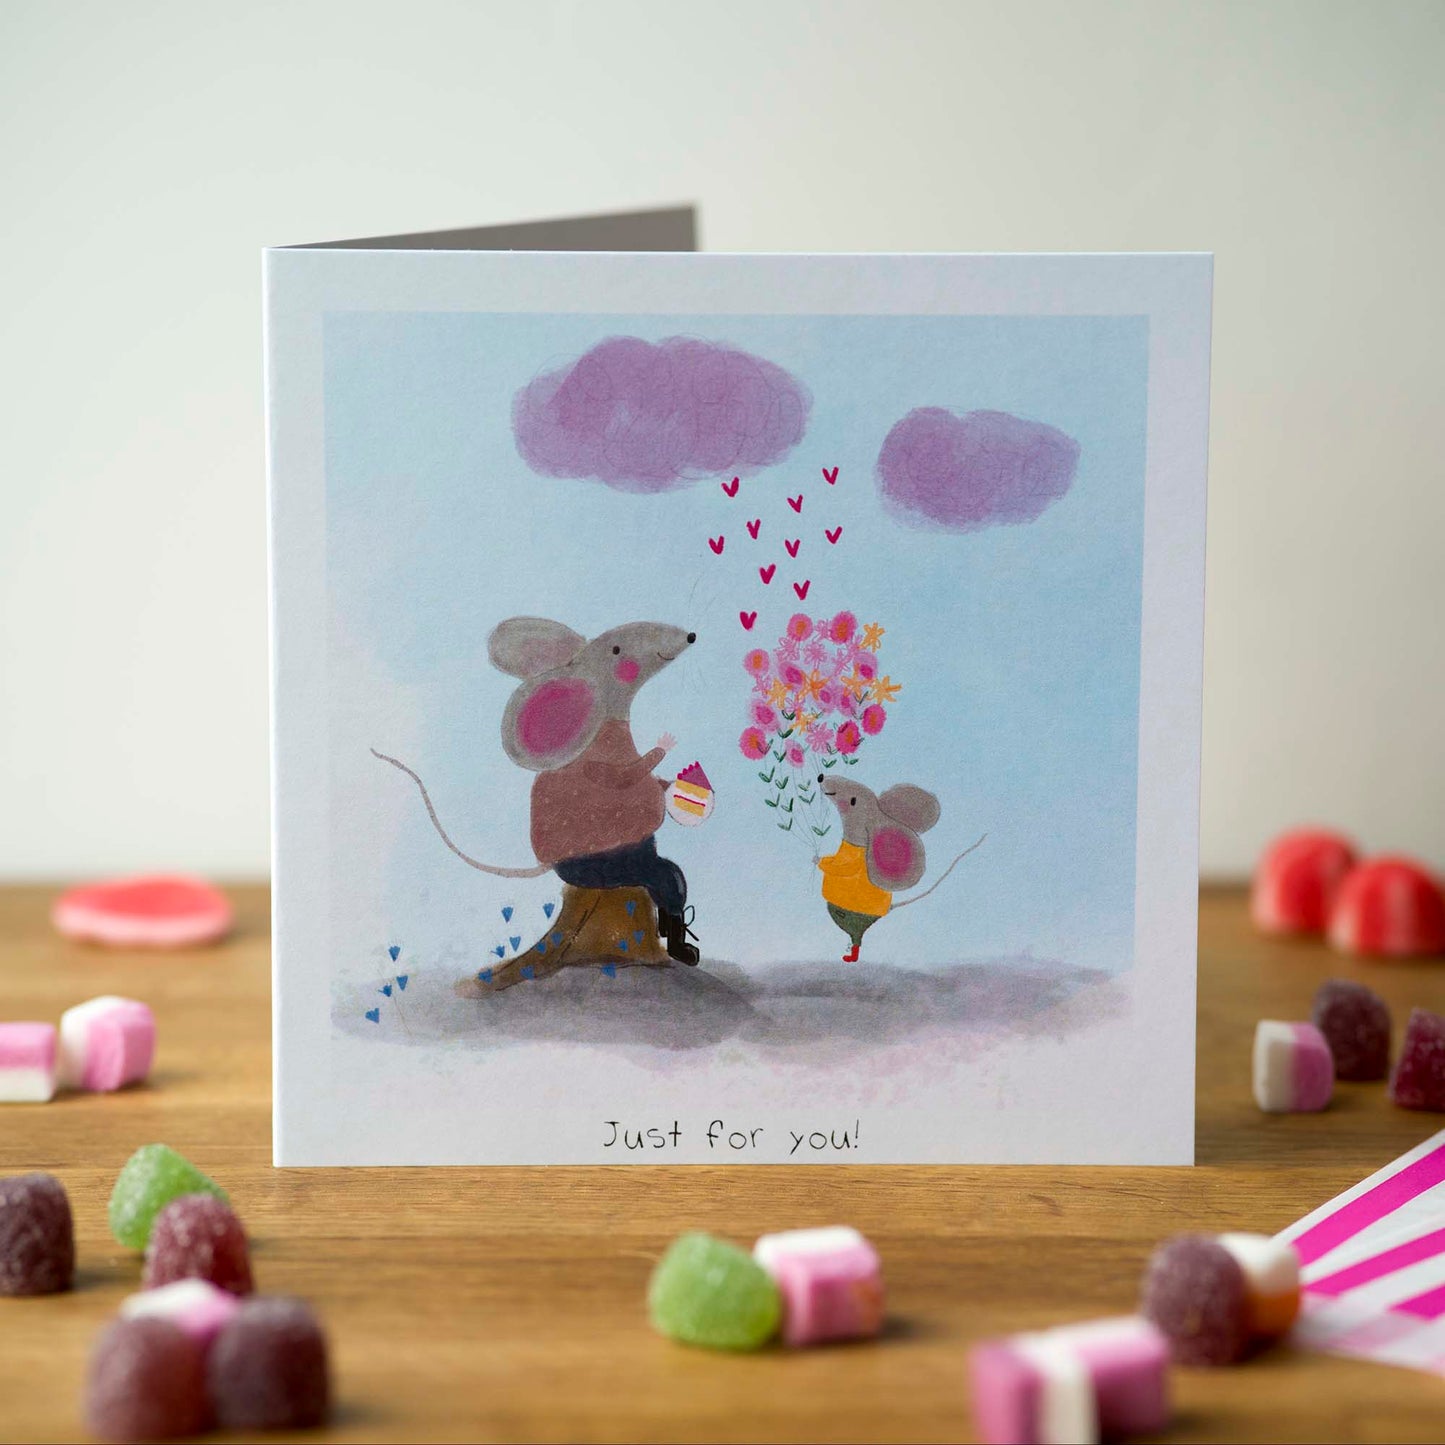 Just for you! Greeting Card